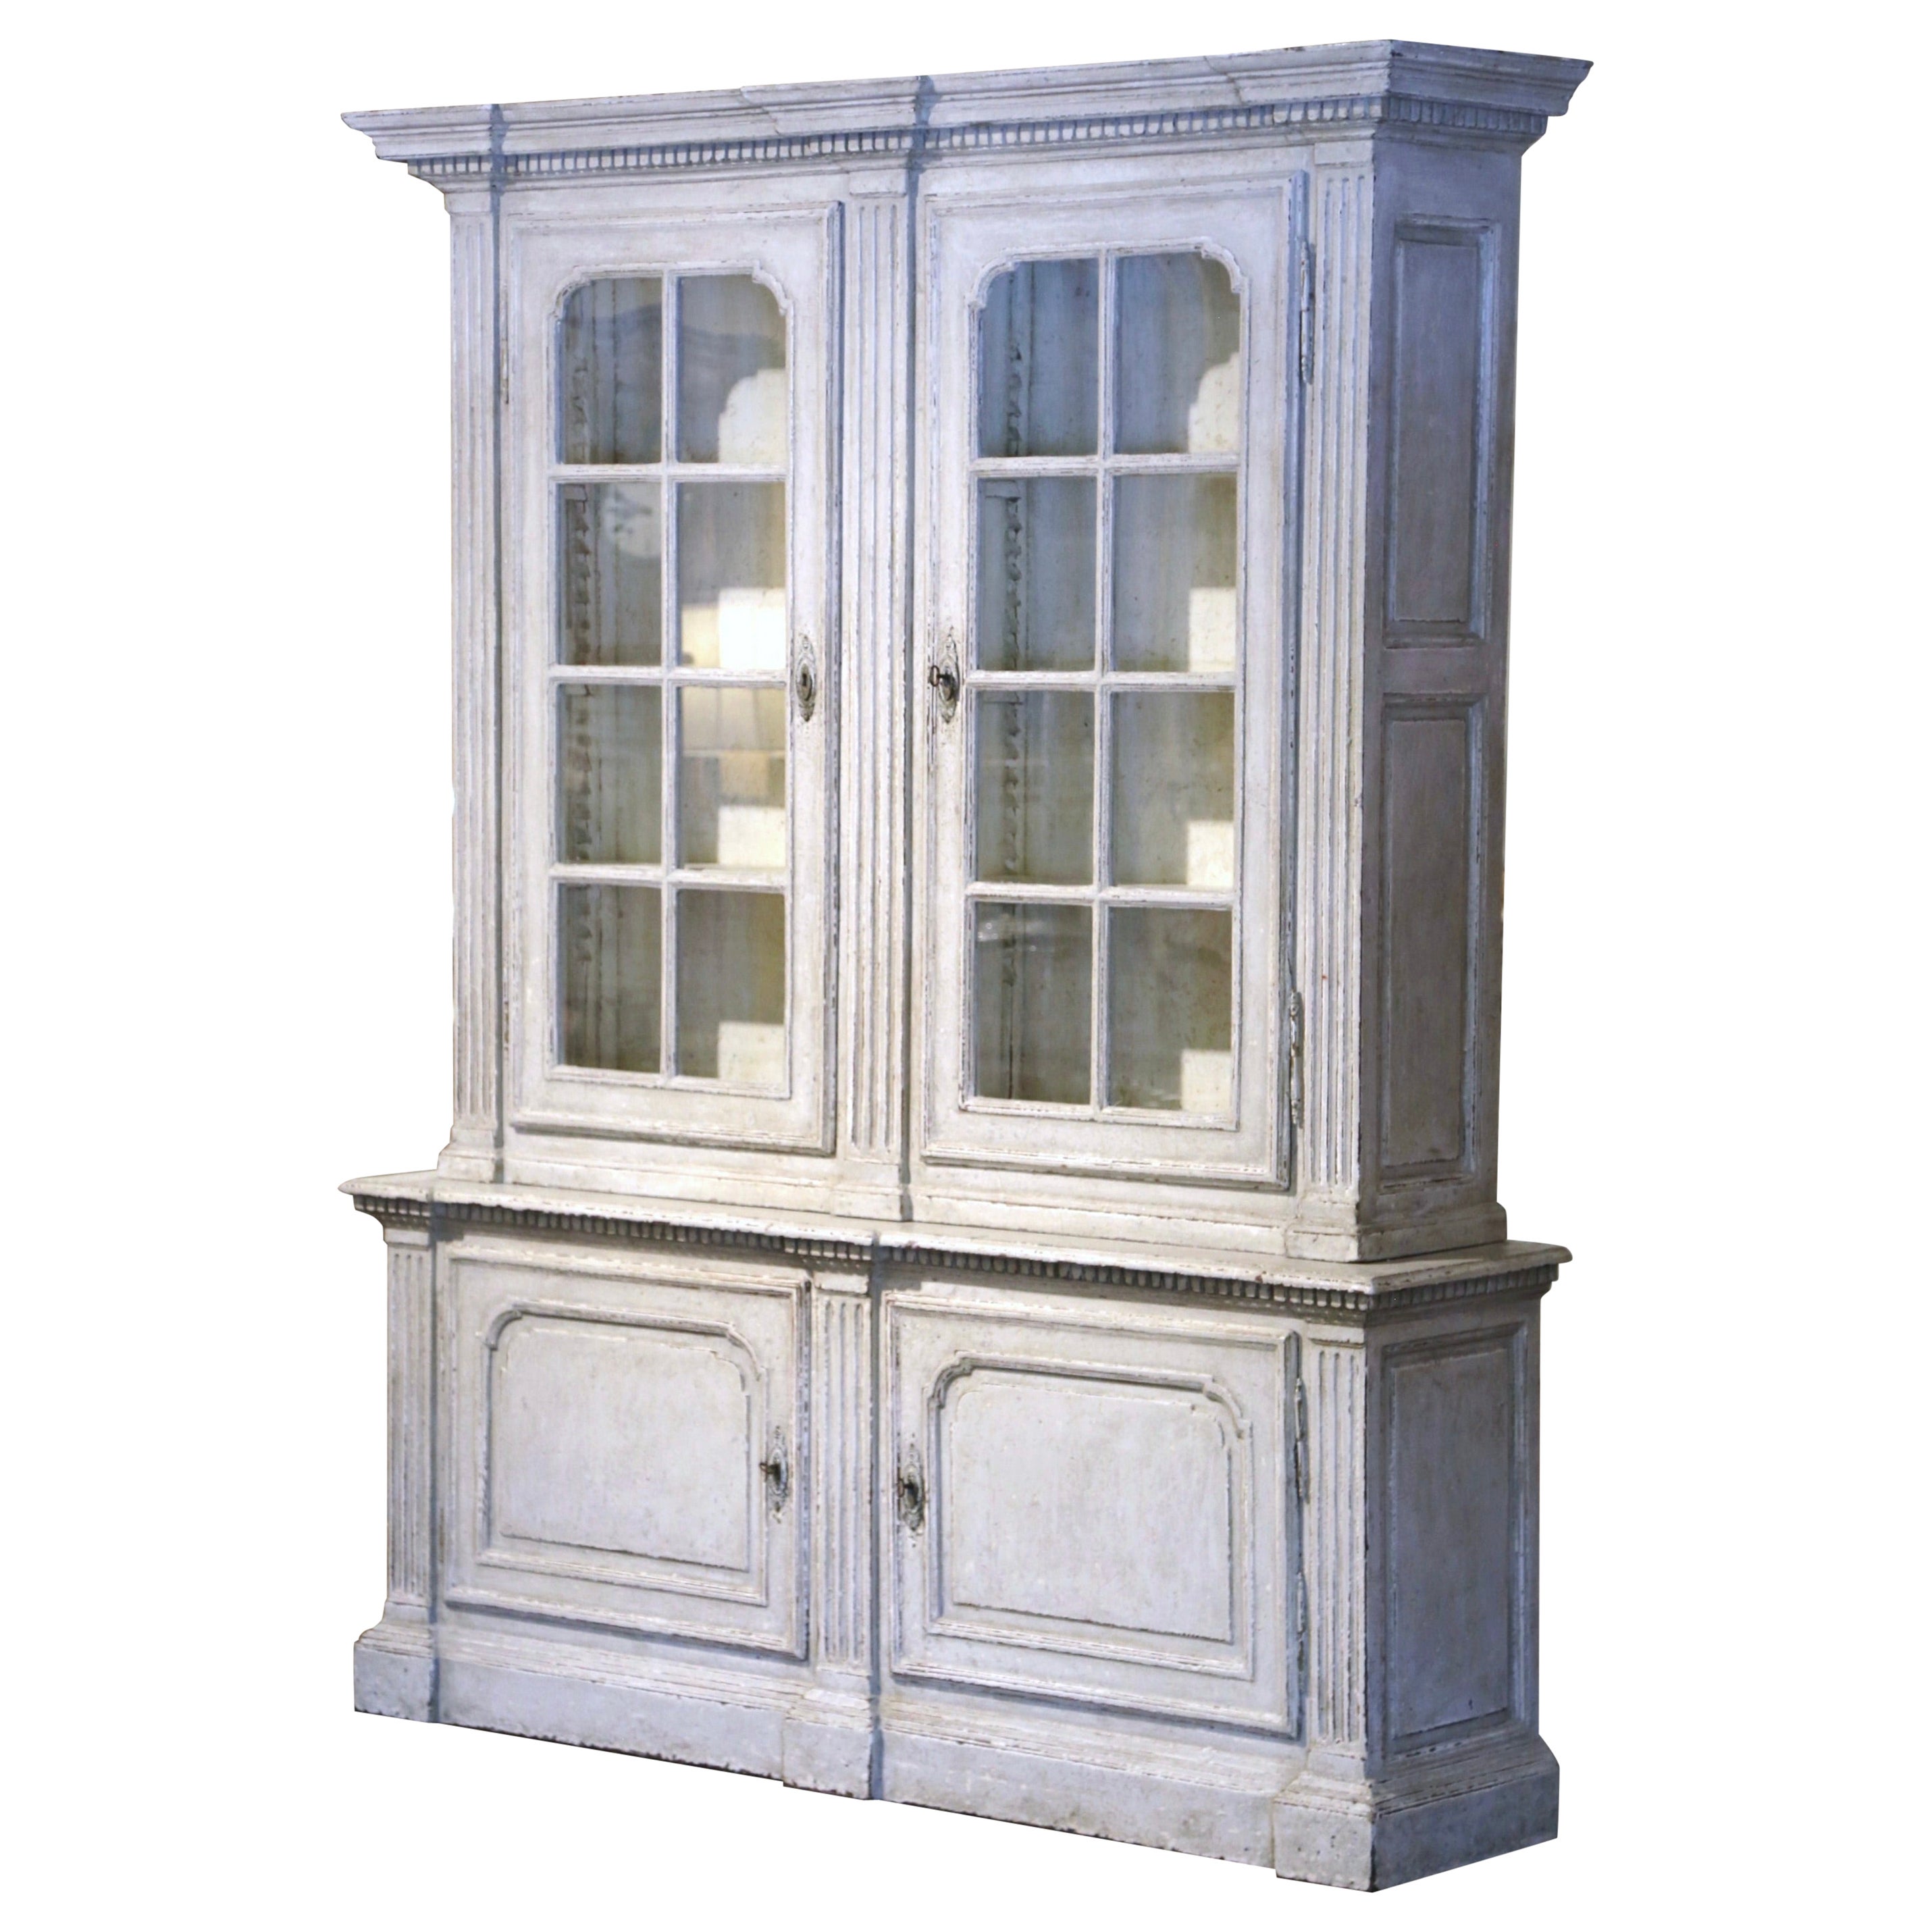 19th Century French Louis XIV Carved Painted Bookcase Cabinet with Glass Doors For Sale